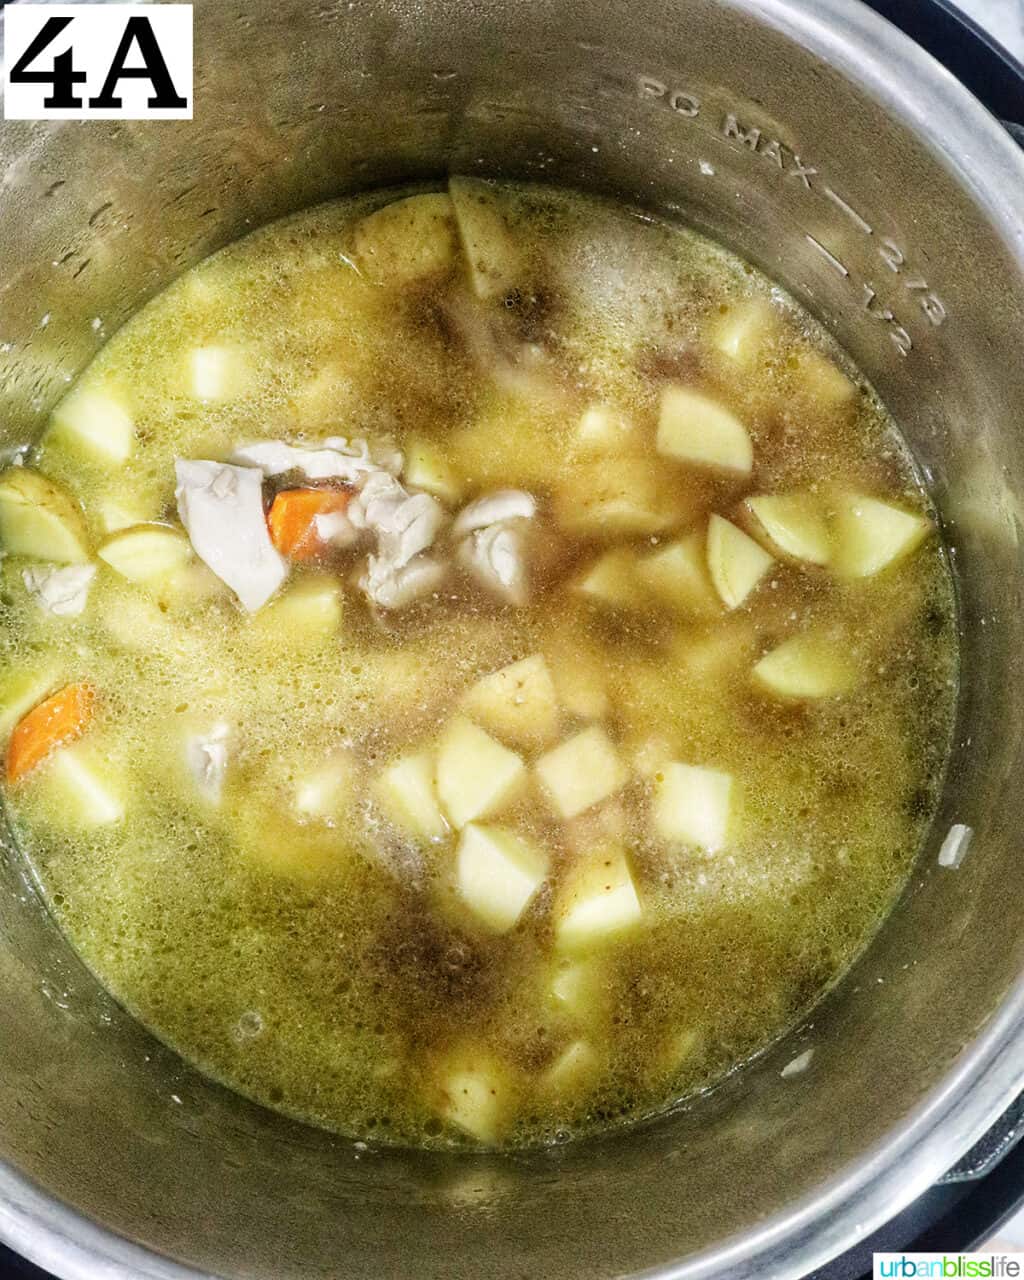 potatoes and chicken broth added to chicken pieces in an instant pot.